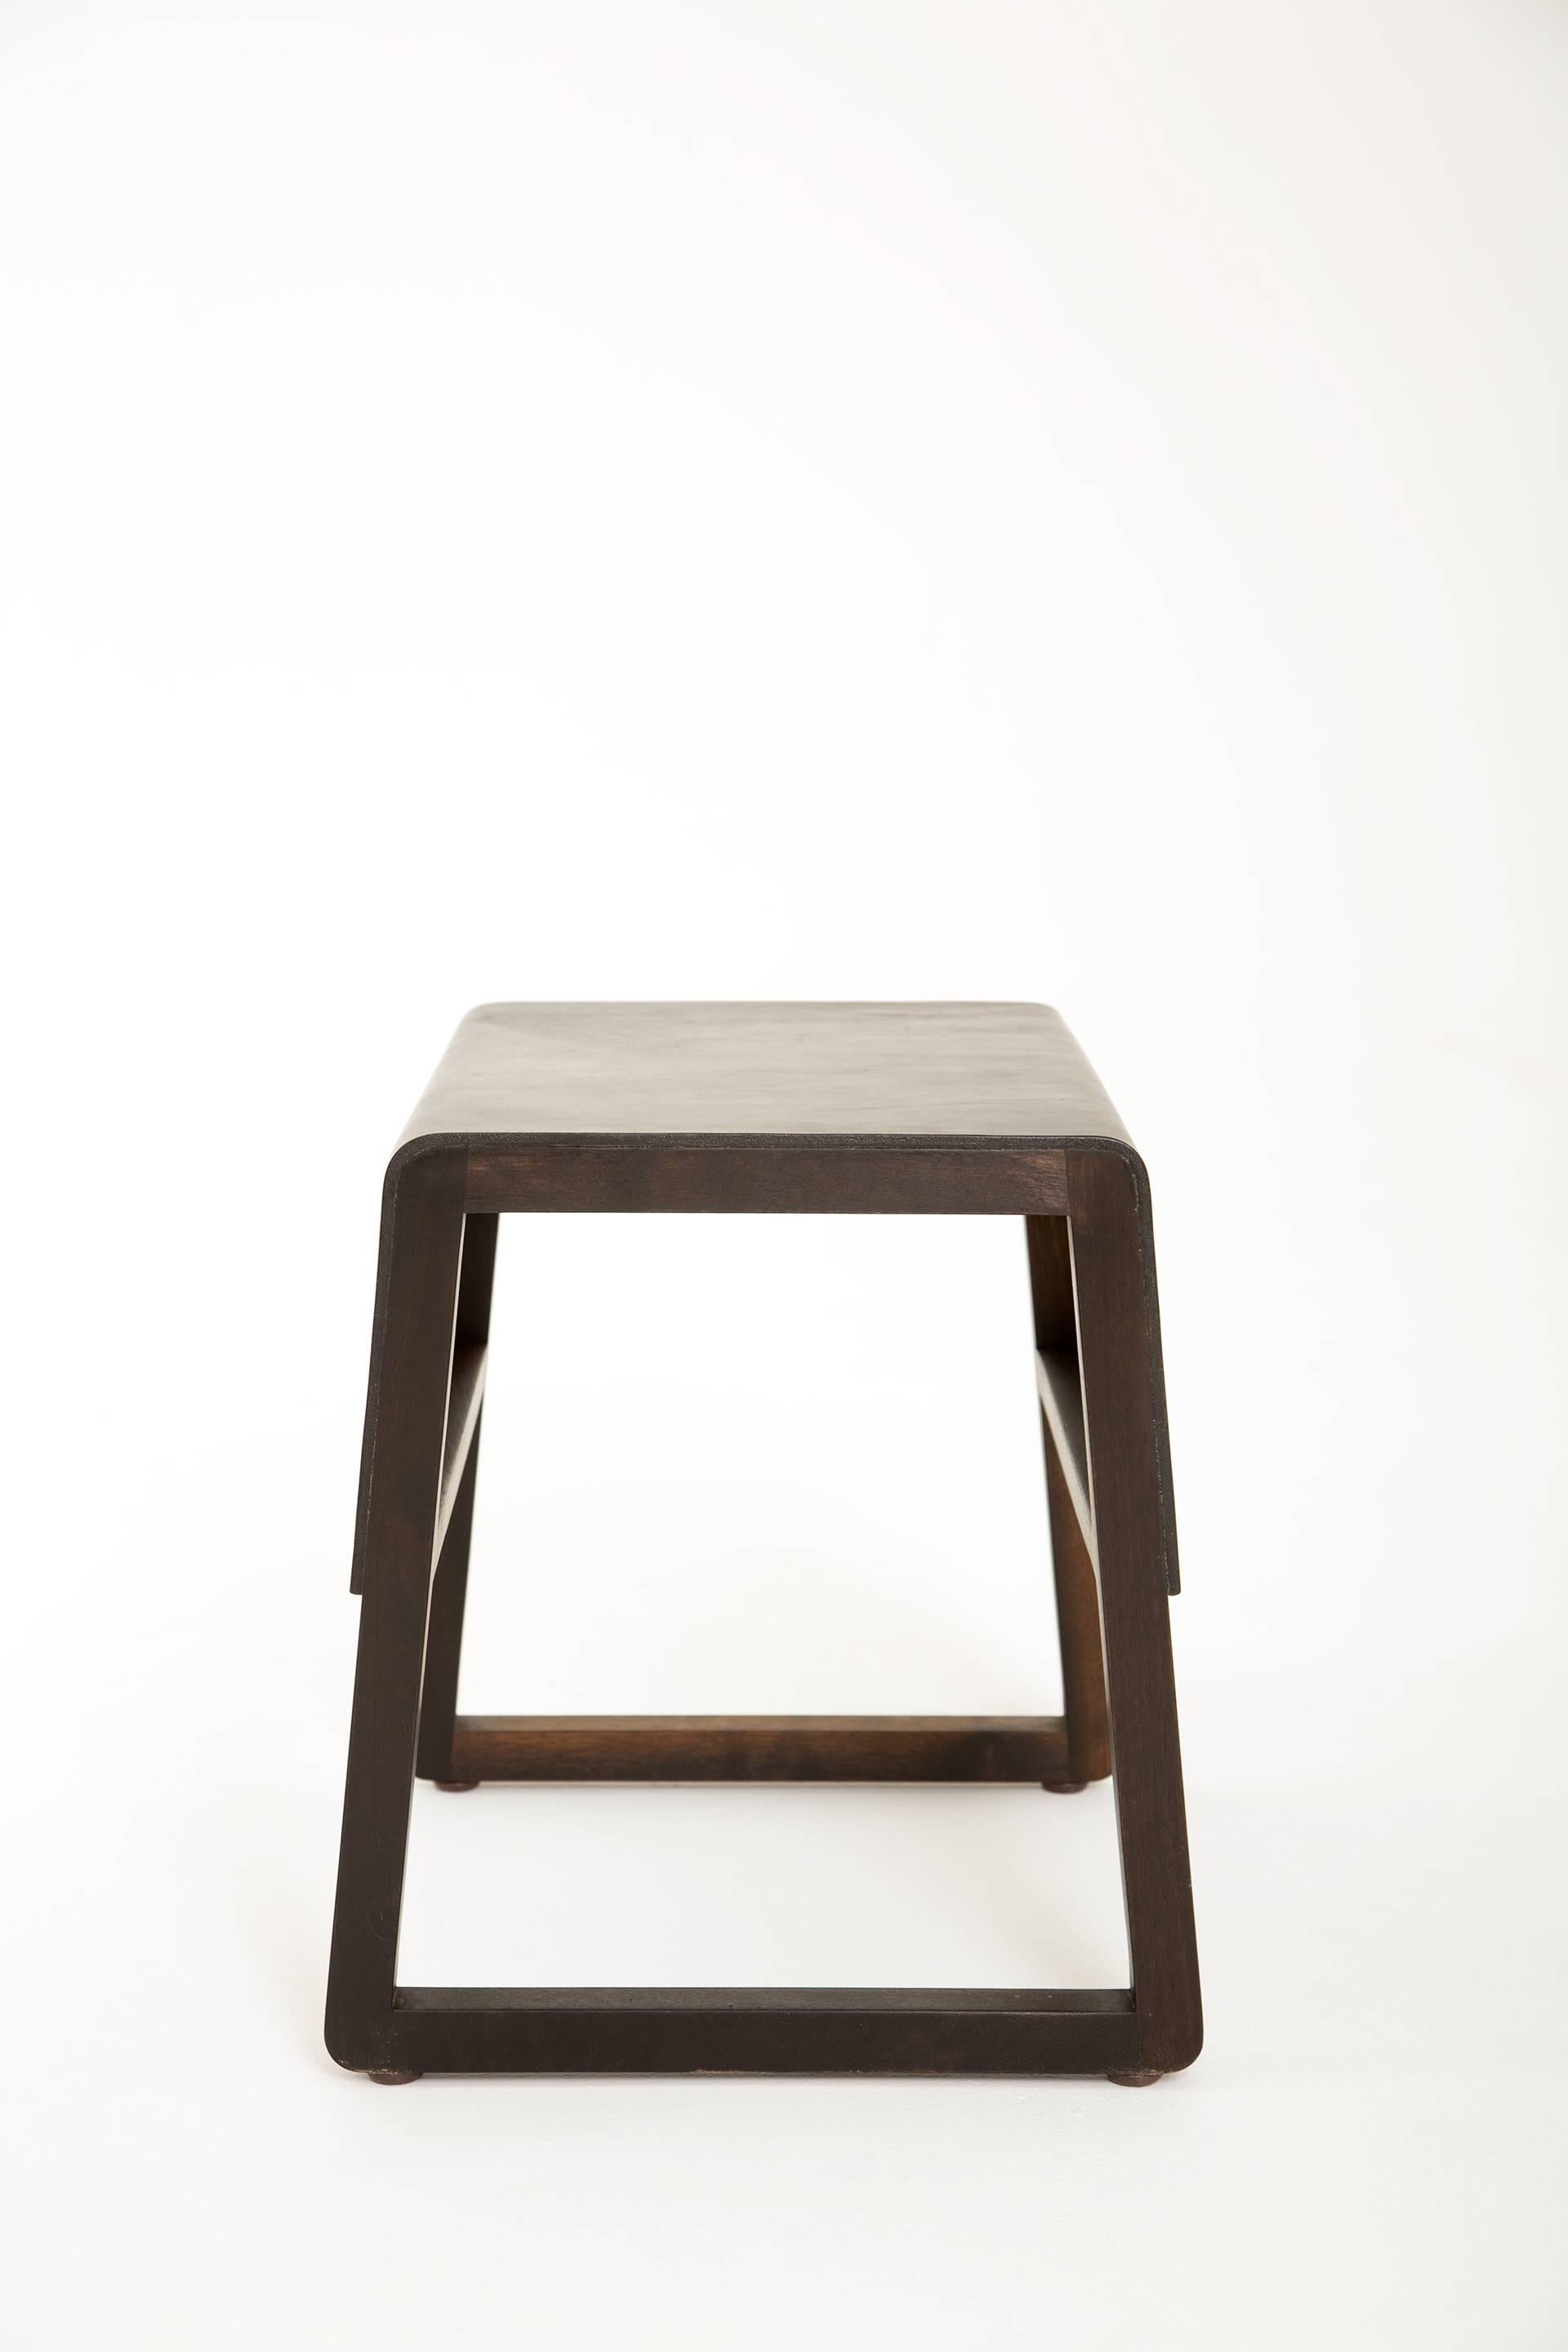 Leather Top Low Stool in Walnut by Max Greenberg for Works Progress, 2016 In Good Condition In Philadelphia, PA